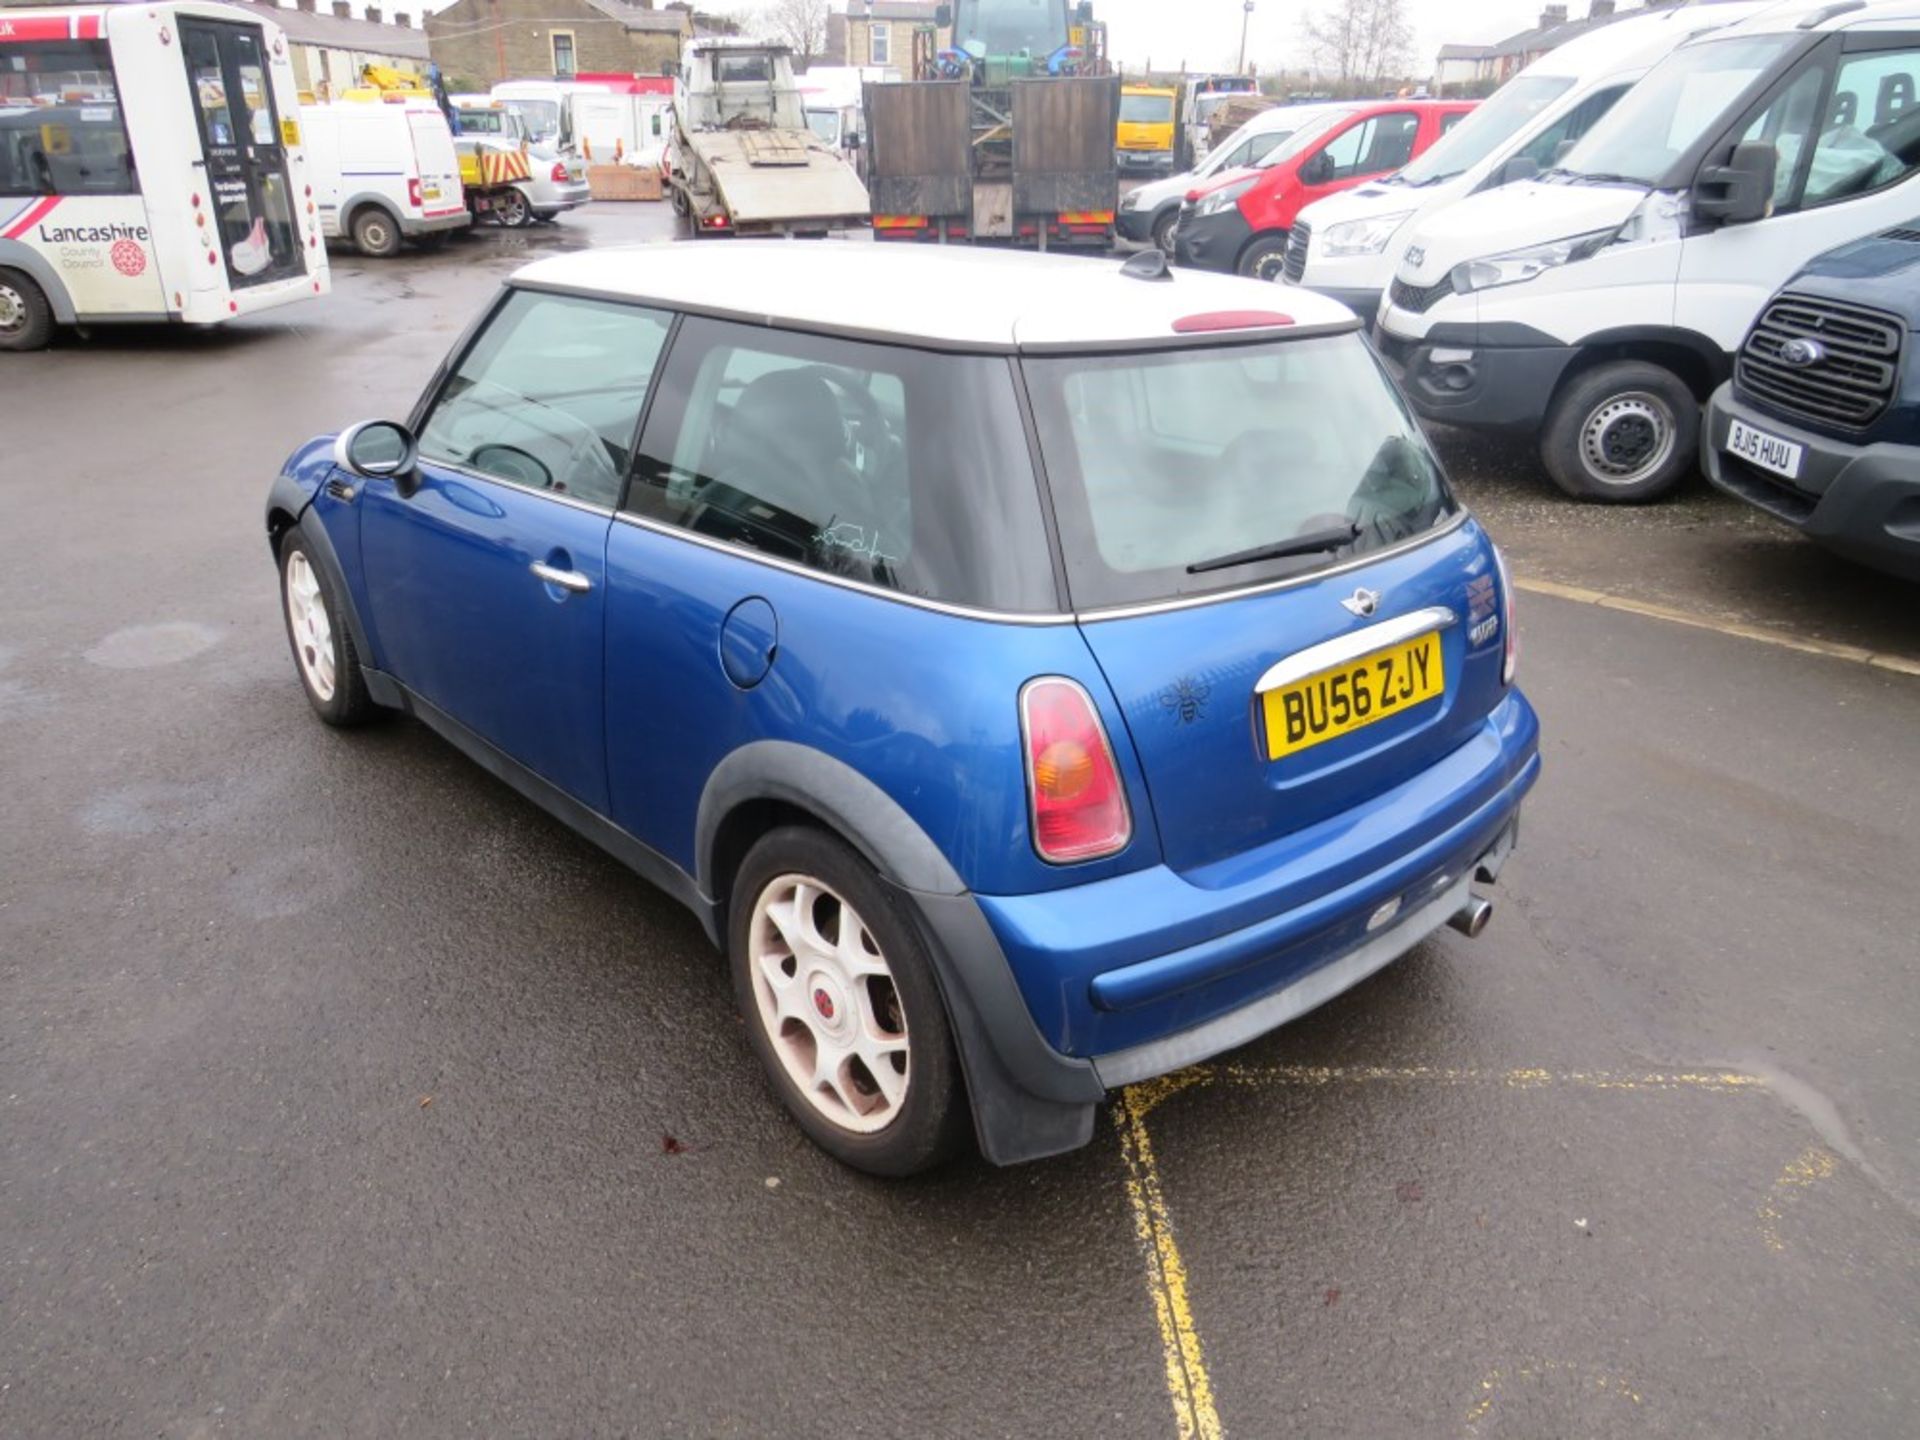 56 reg MINI COOPER, 1ST REG 09/06, TEST 03/21, 107514M NOT WARRANTED, V5 HERE, 10 FORMER KEEPERS [NO - Image 3 of 6